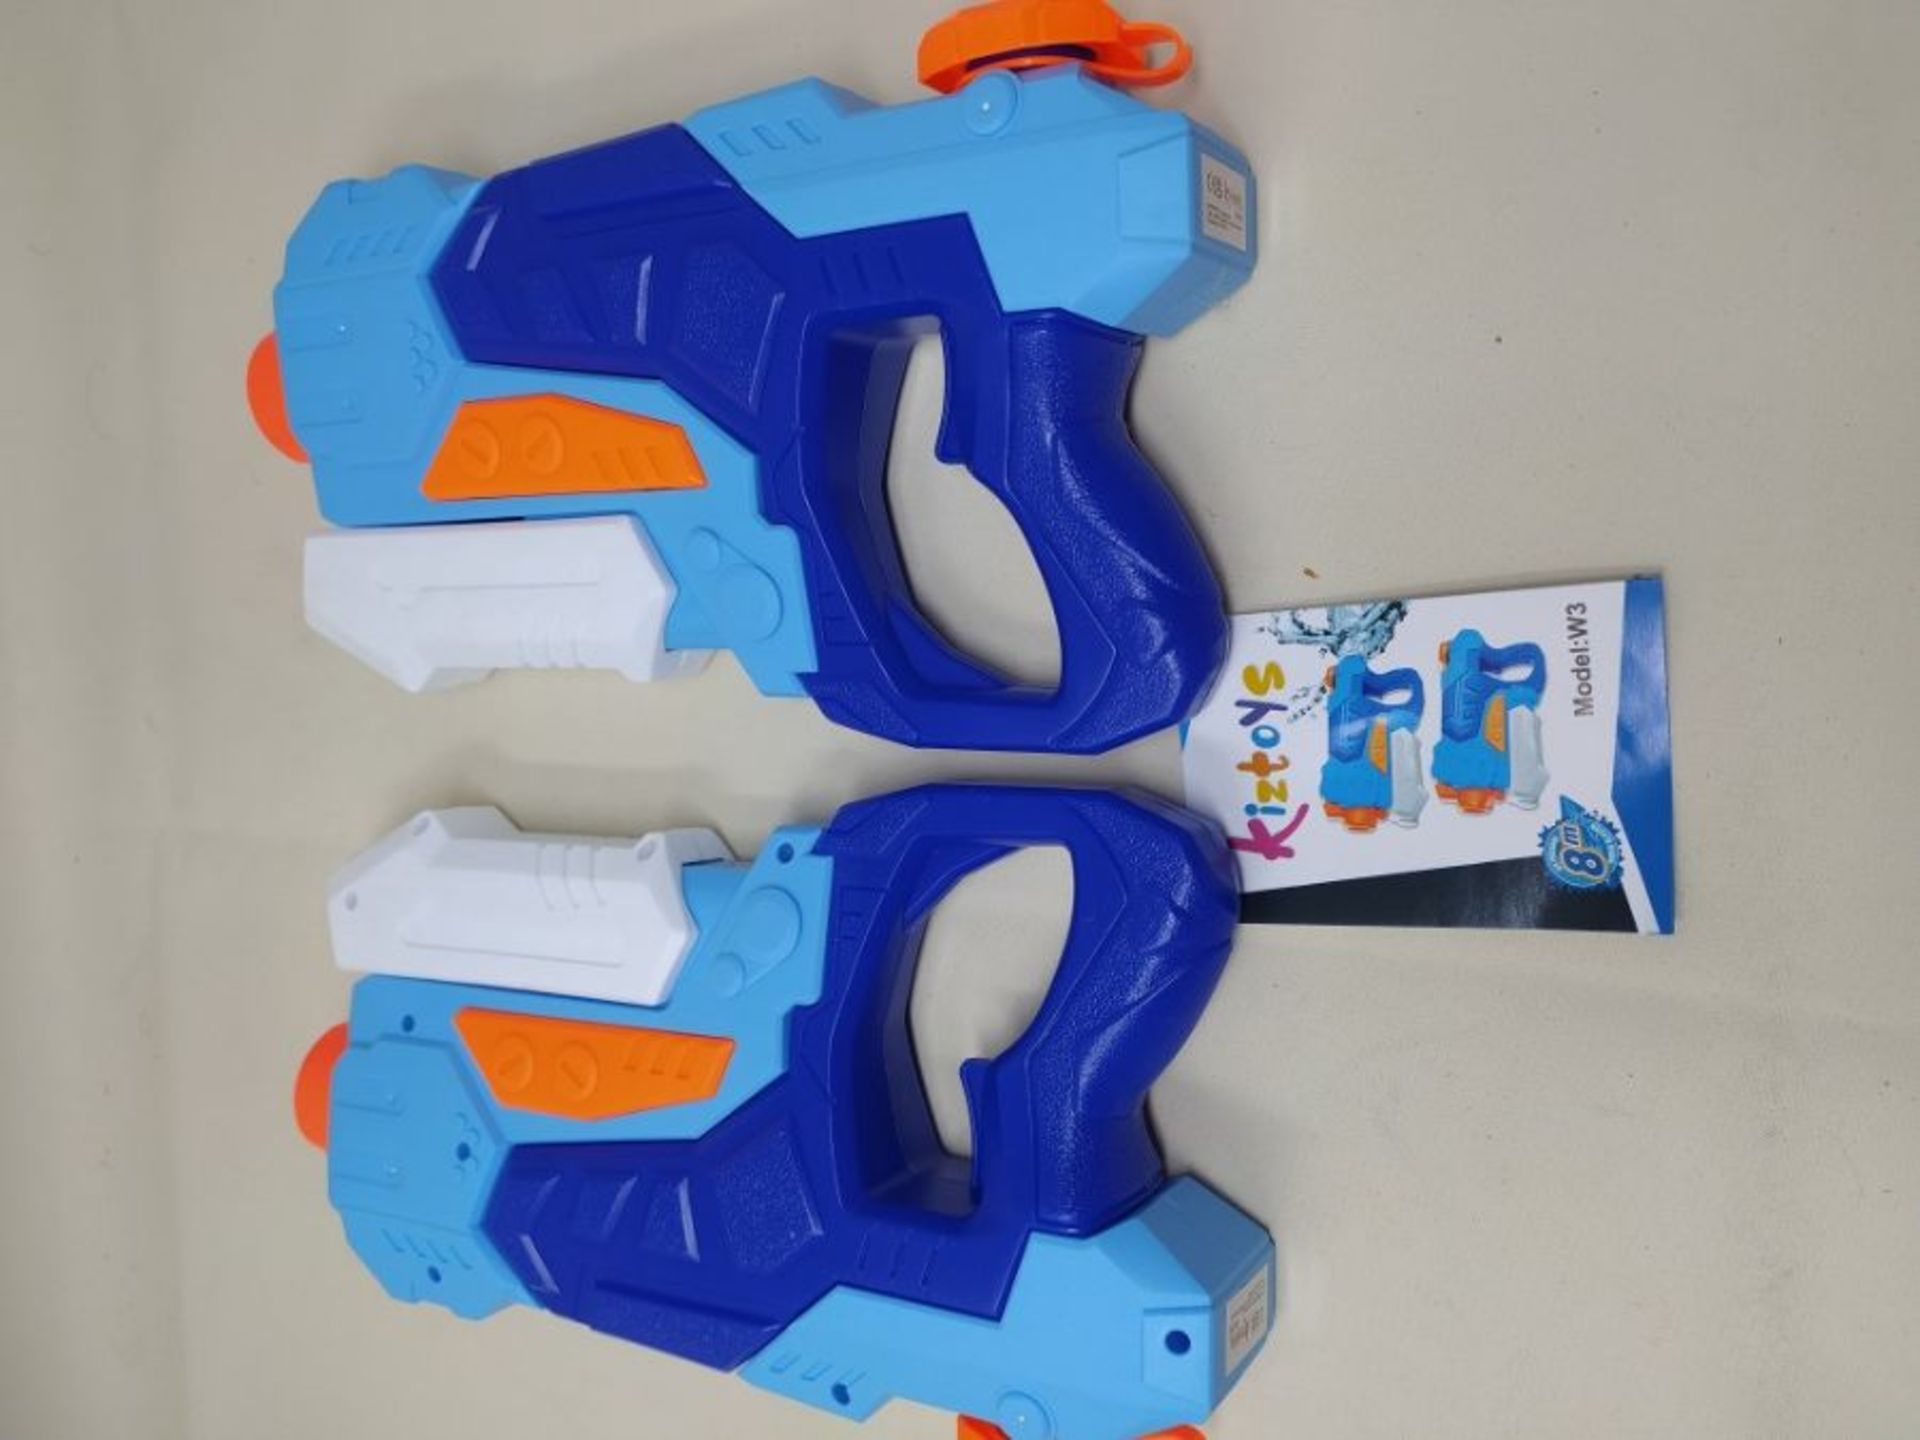 Kiztoys Water Gun Toys for Kids, 2 Pack Powerful Water Pistols with 1200ML Large Capac - Image 2 of 2